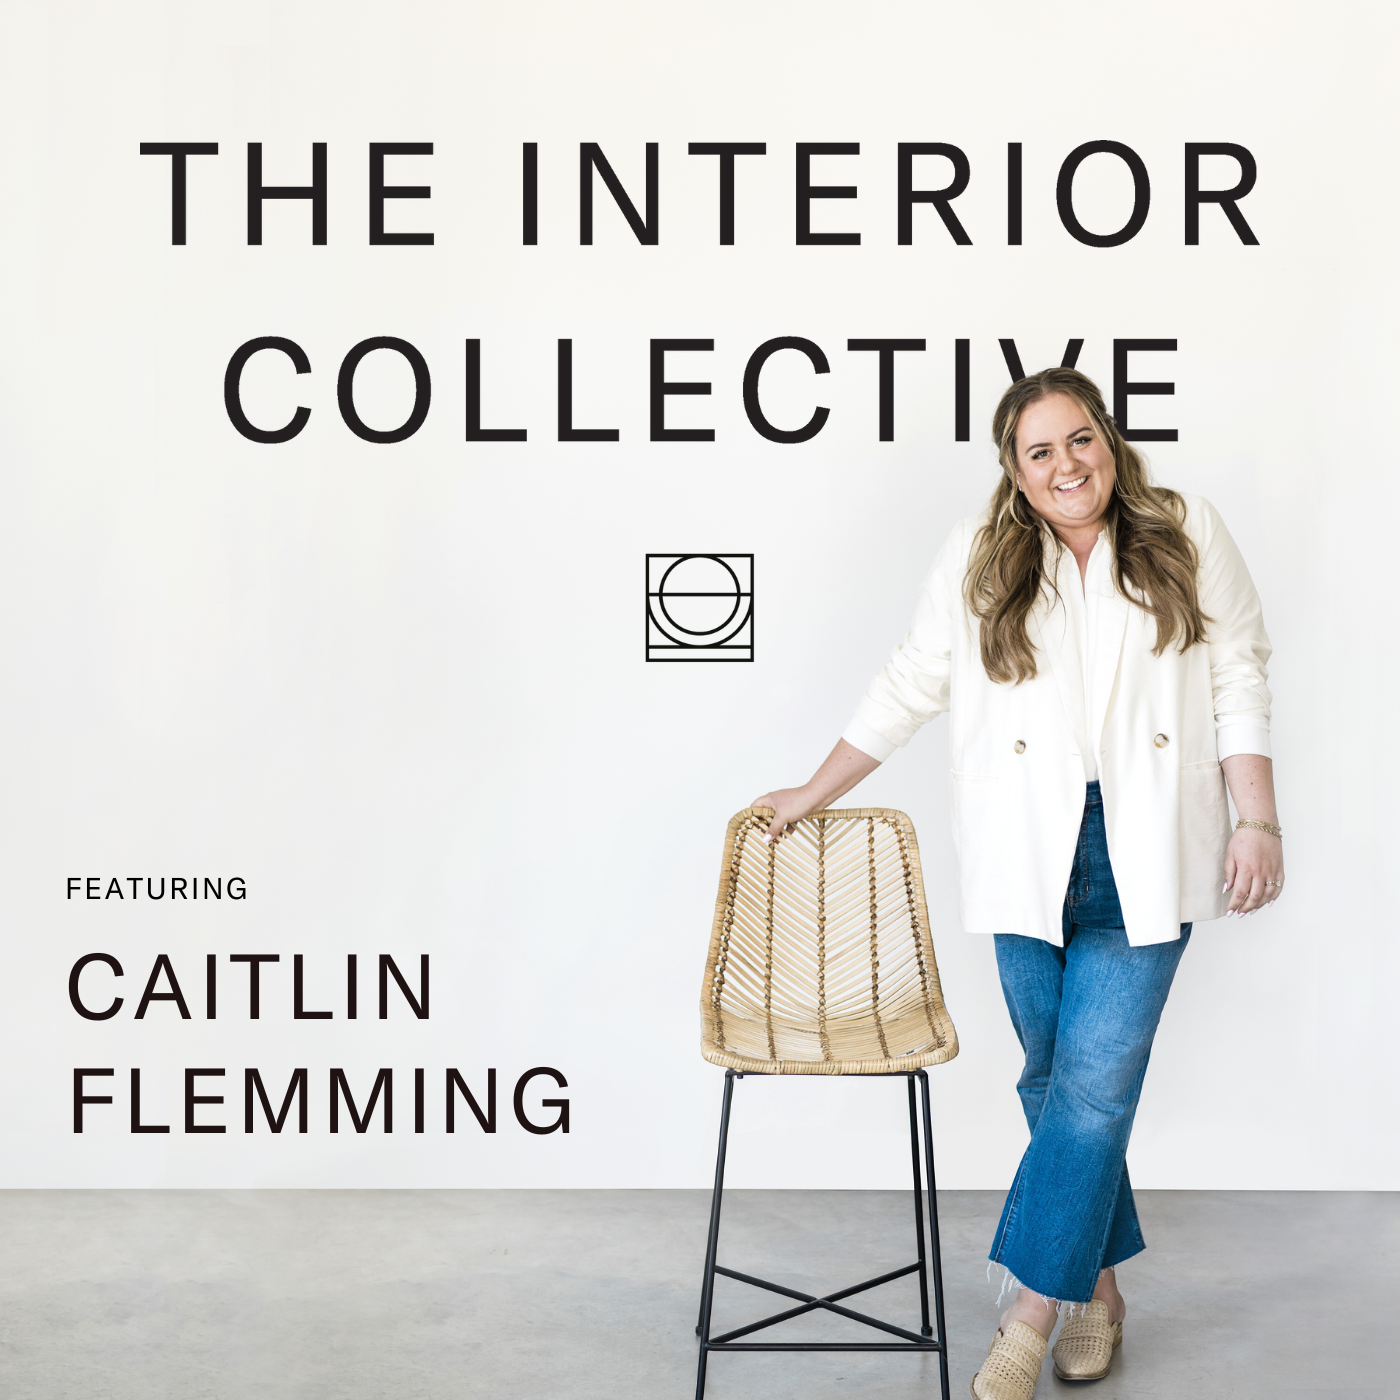 Caitlin Flemming: How the Pandemic Changed Our Interior Design Process, Forever